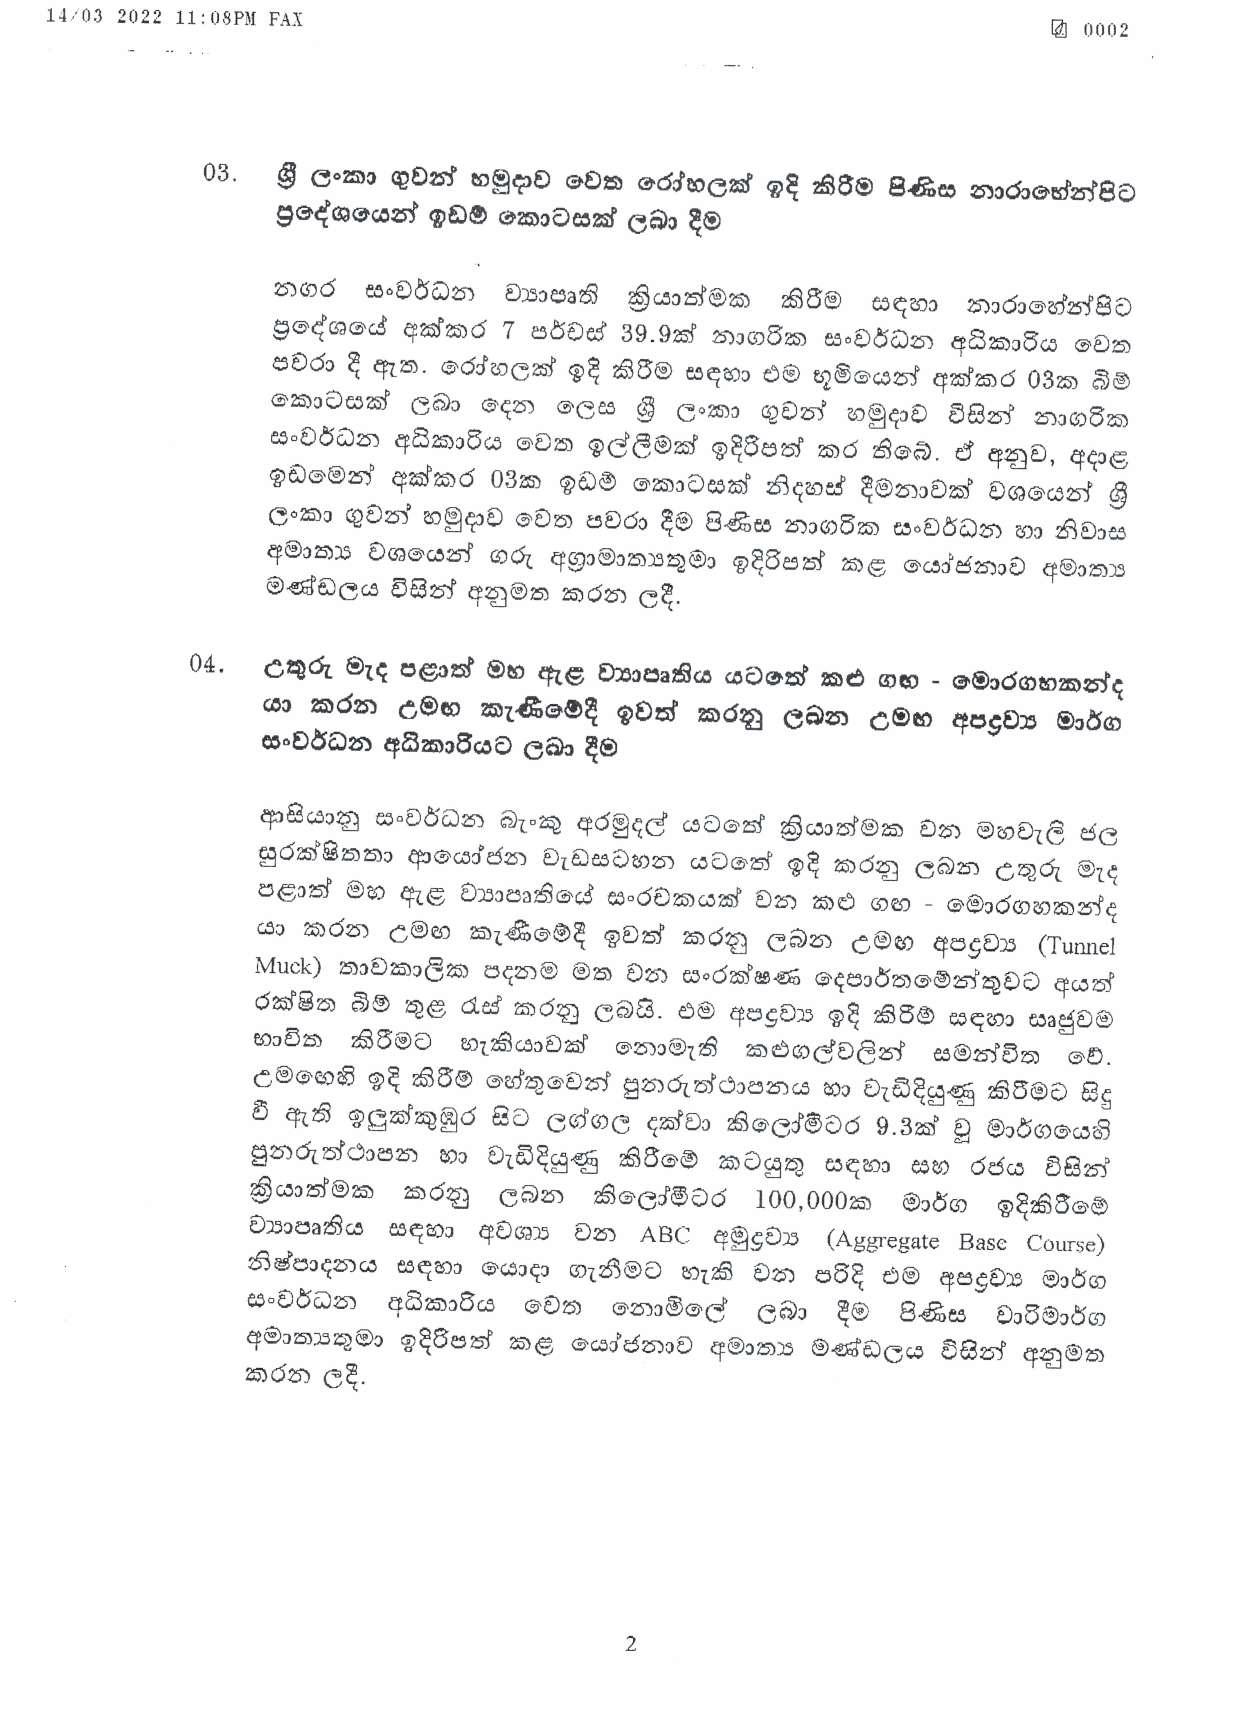 Cabinet Decision on 14.03.2022 page 002